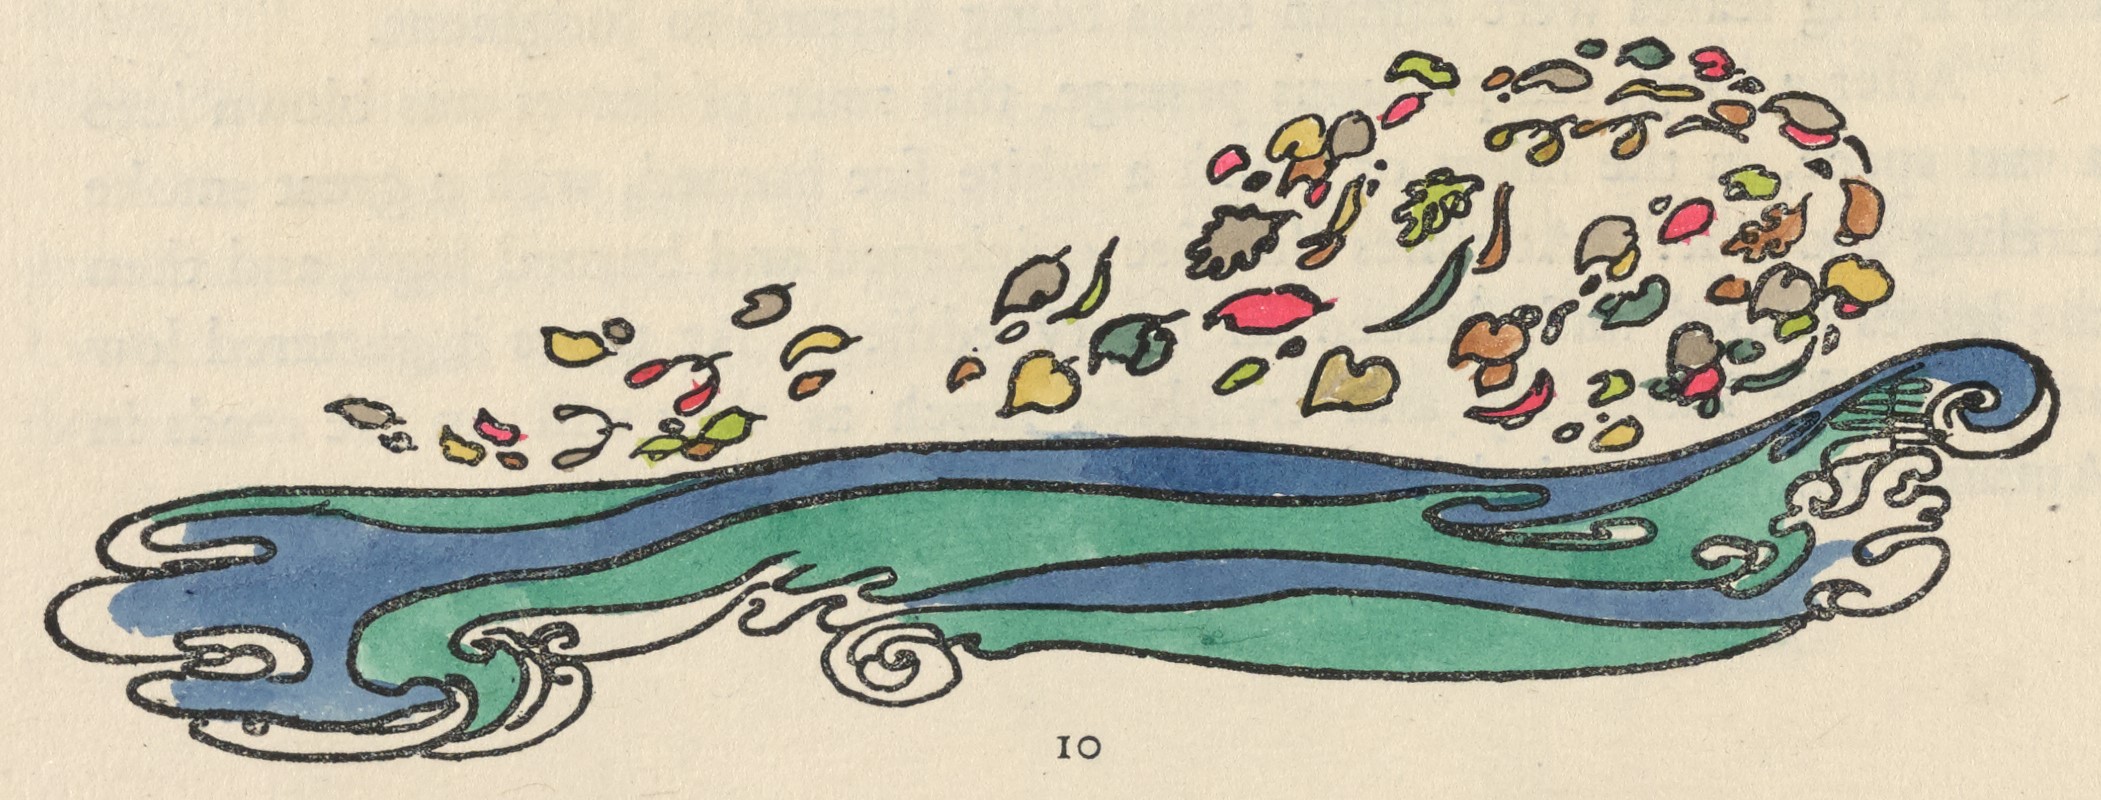 This coloured illustration is a tailpiece to John Masefield’s “Jan A Dreams.” It comes at the end of the text, centered on the page, unframed. In the image, coloured leaves are tossed in the wind over blue and green crested waves. Both leaves and waves are outlined in black. The artist’s monogram is visible beneath the crest of the topmost wave, on the right side of the image.